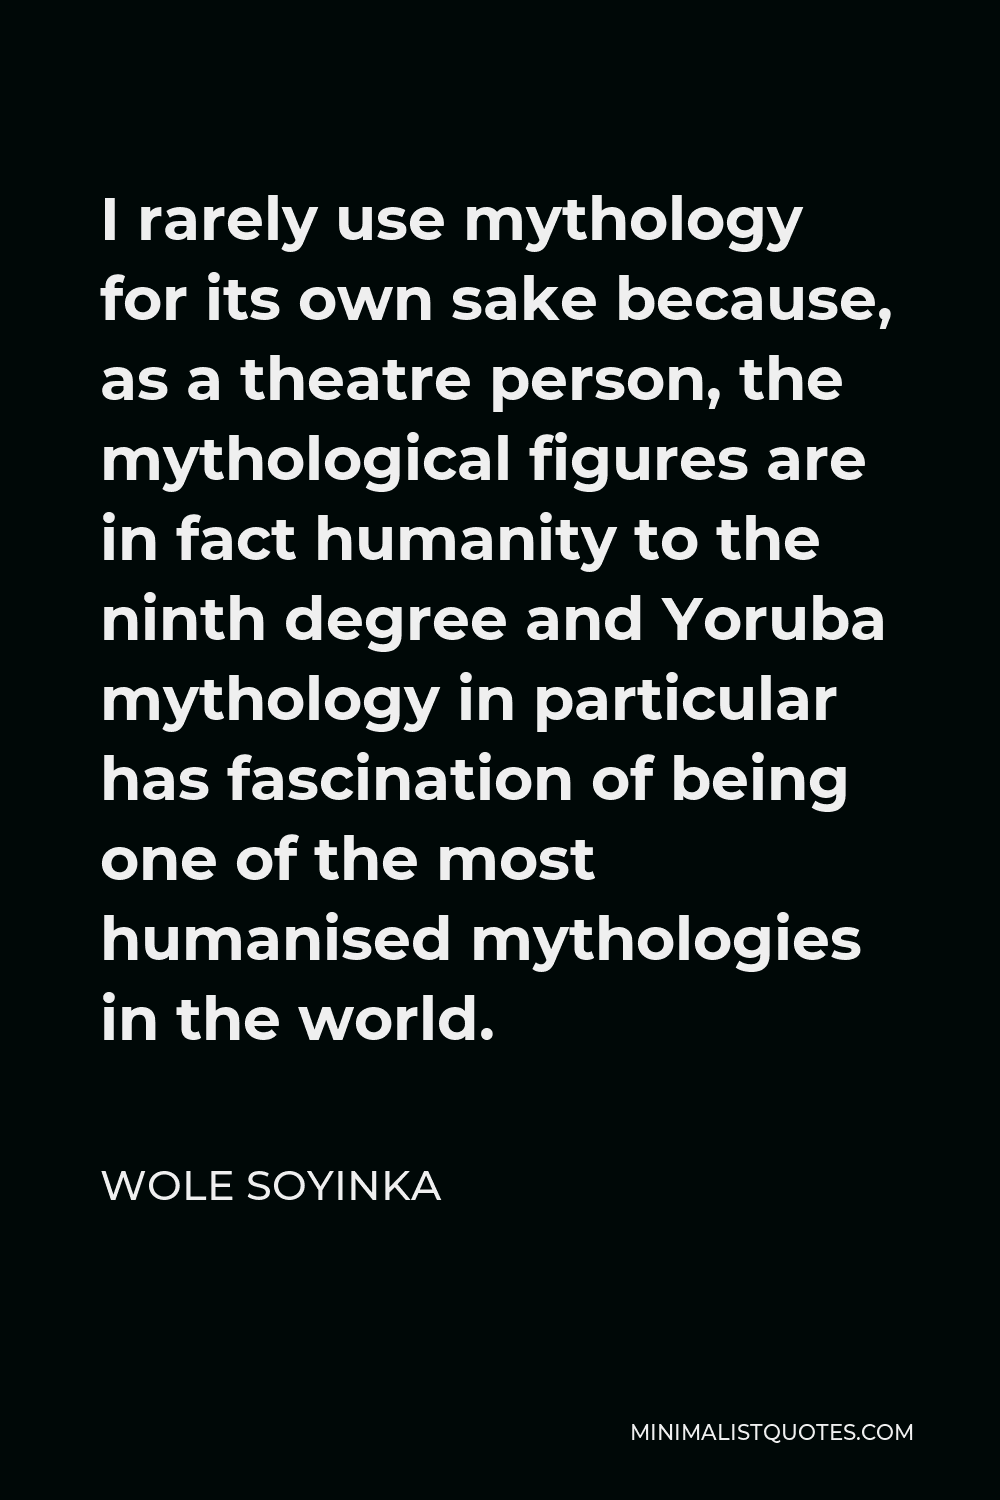 Wole Soyinka Quote - I rarely use mythology for its own sake because, as a theatre person, the mythological figures are in fact humanity to the ninth degree and Yoruba mythology in particular has fascination of being one of the most humanised mythologies in the world.